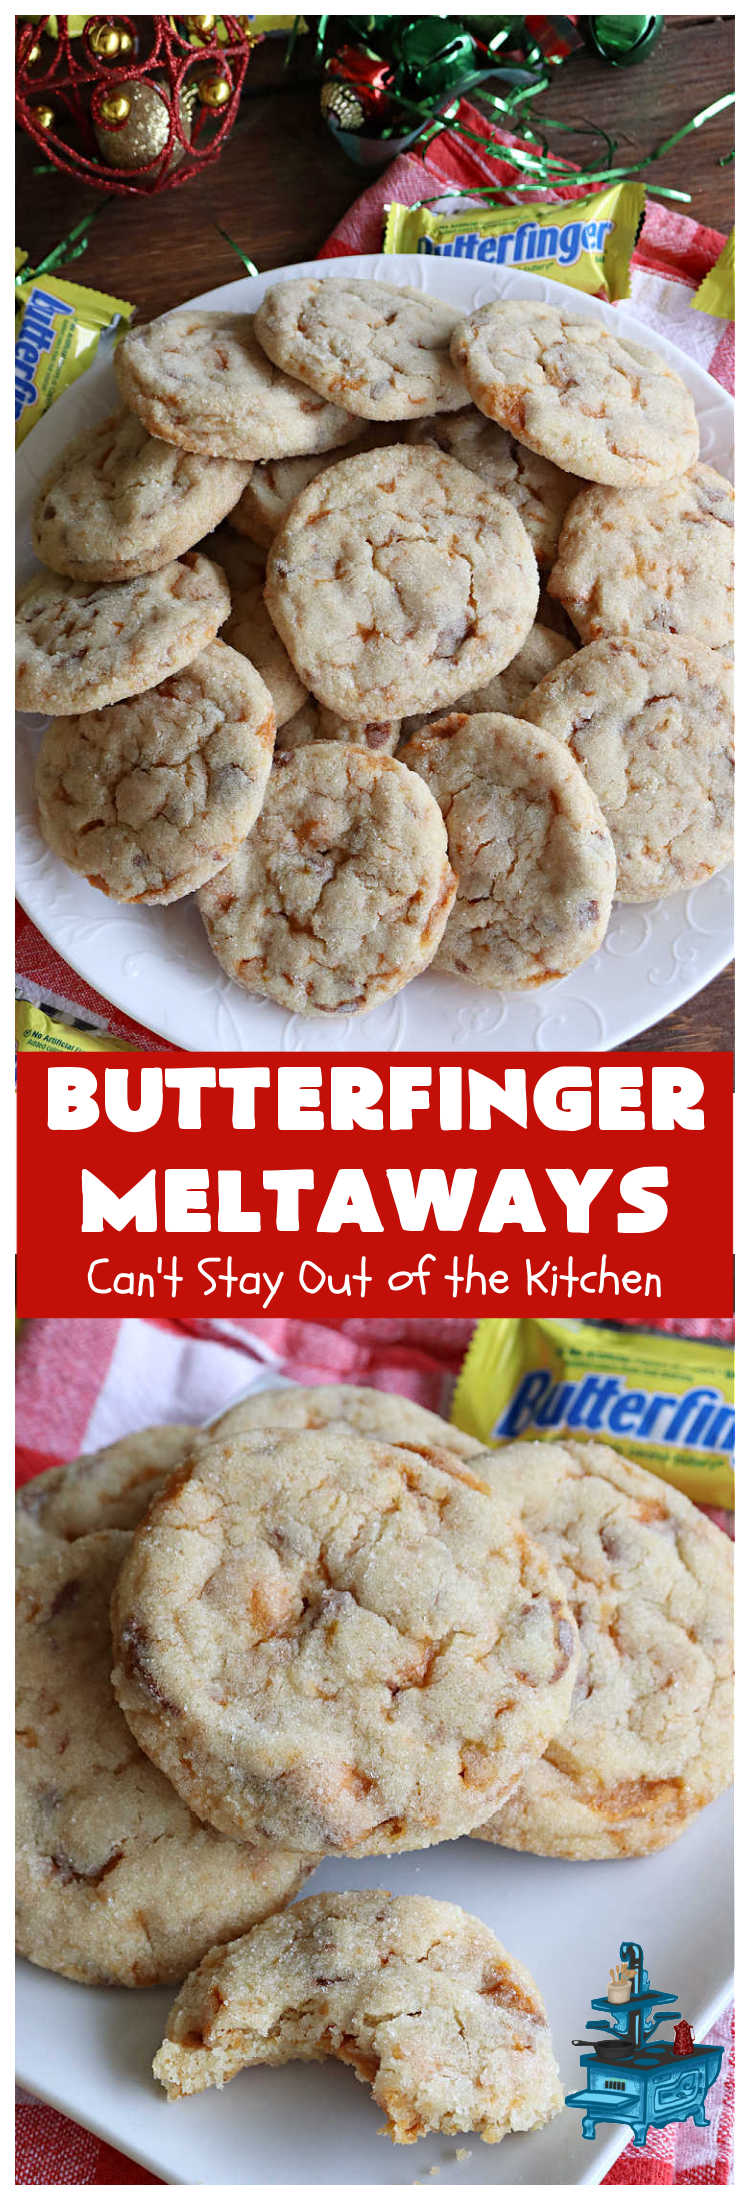 Butterfinger Meltaways | Can't Stay Out of the Kitchen | these melt-in-your-mouth #cookies are outrageously good! They are filled with #ButterfingerCandyBars & dissolve in your mouth upon contact! Prepare to swoon over every delicious bite. #Butterfingers #ButterfingerDessert #chocolate #holiday  #ChristmasCookieExchange #PeanutButter #ButterfingerMeltaways